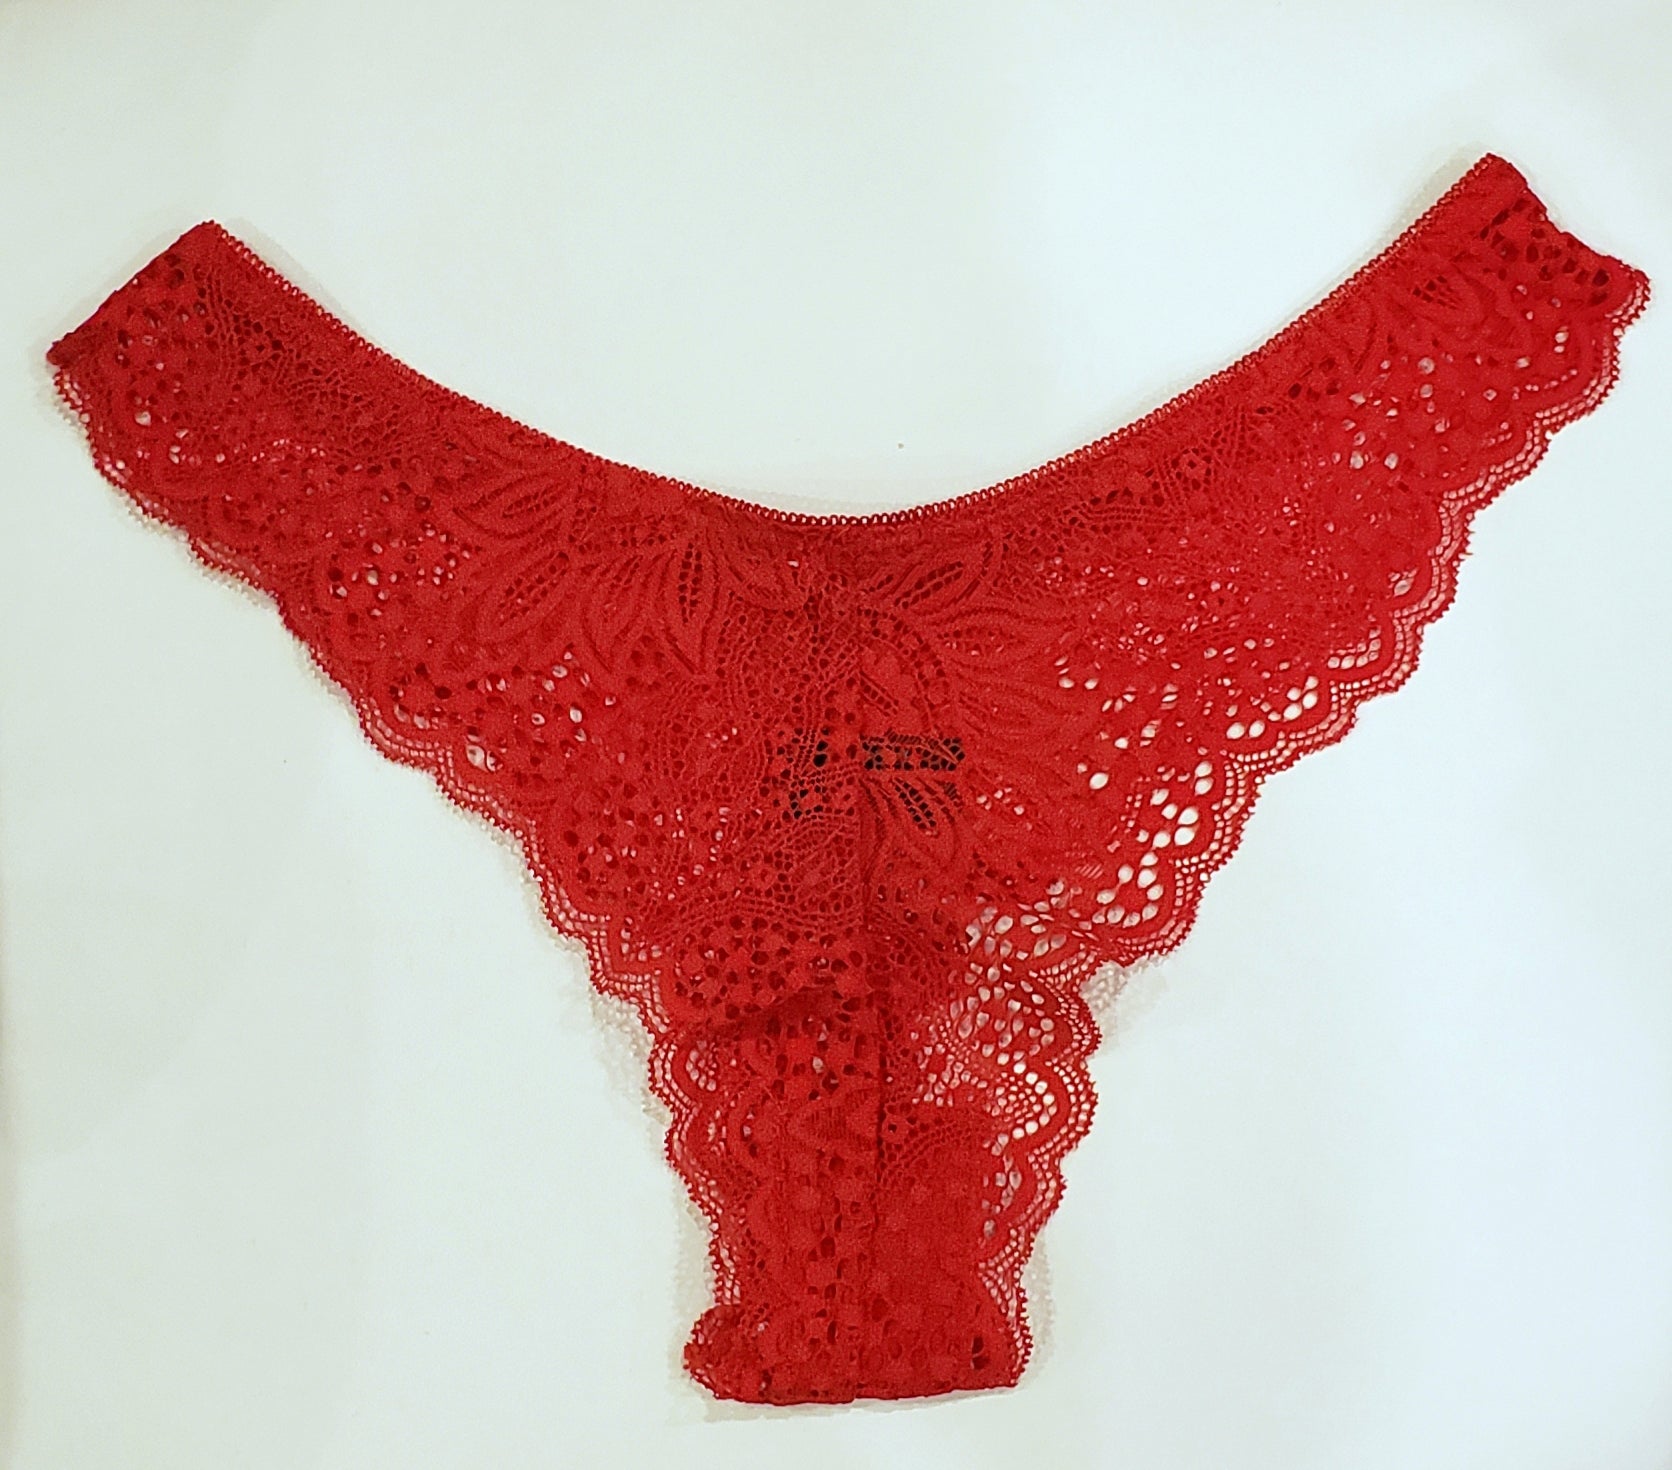 Mid Rise Lace Floral Thong